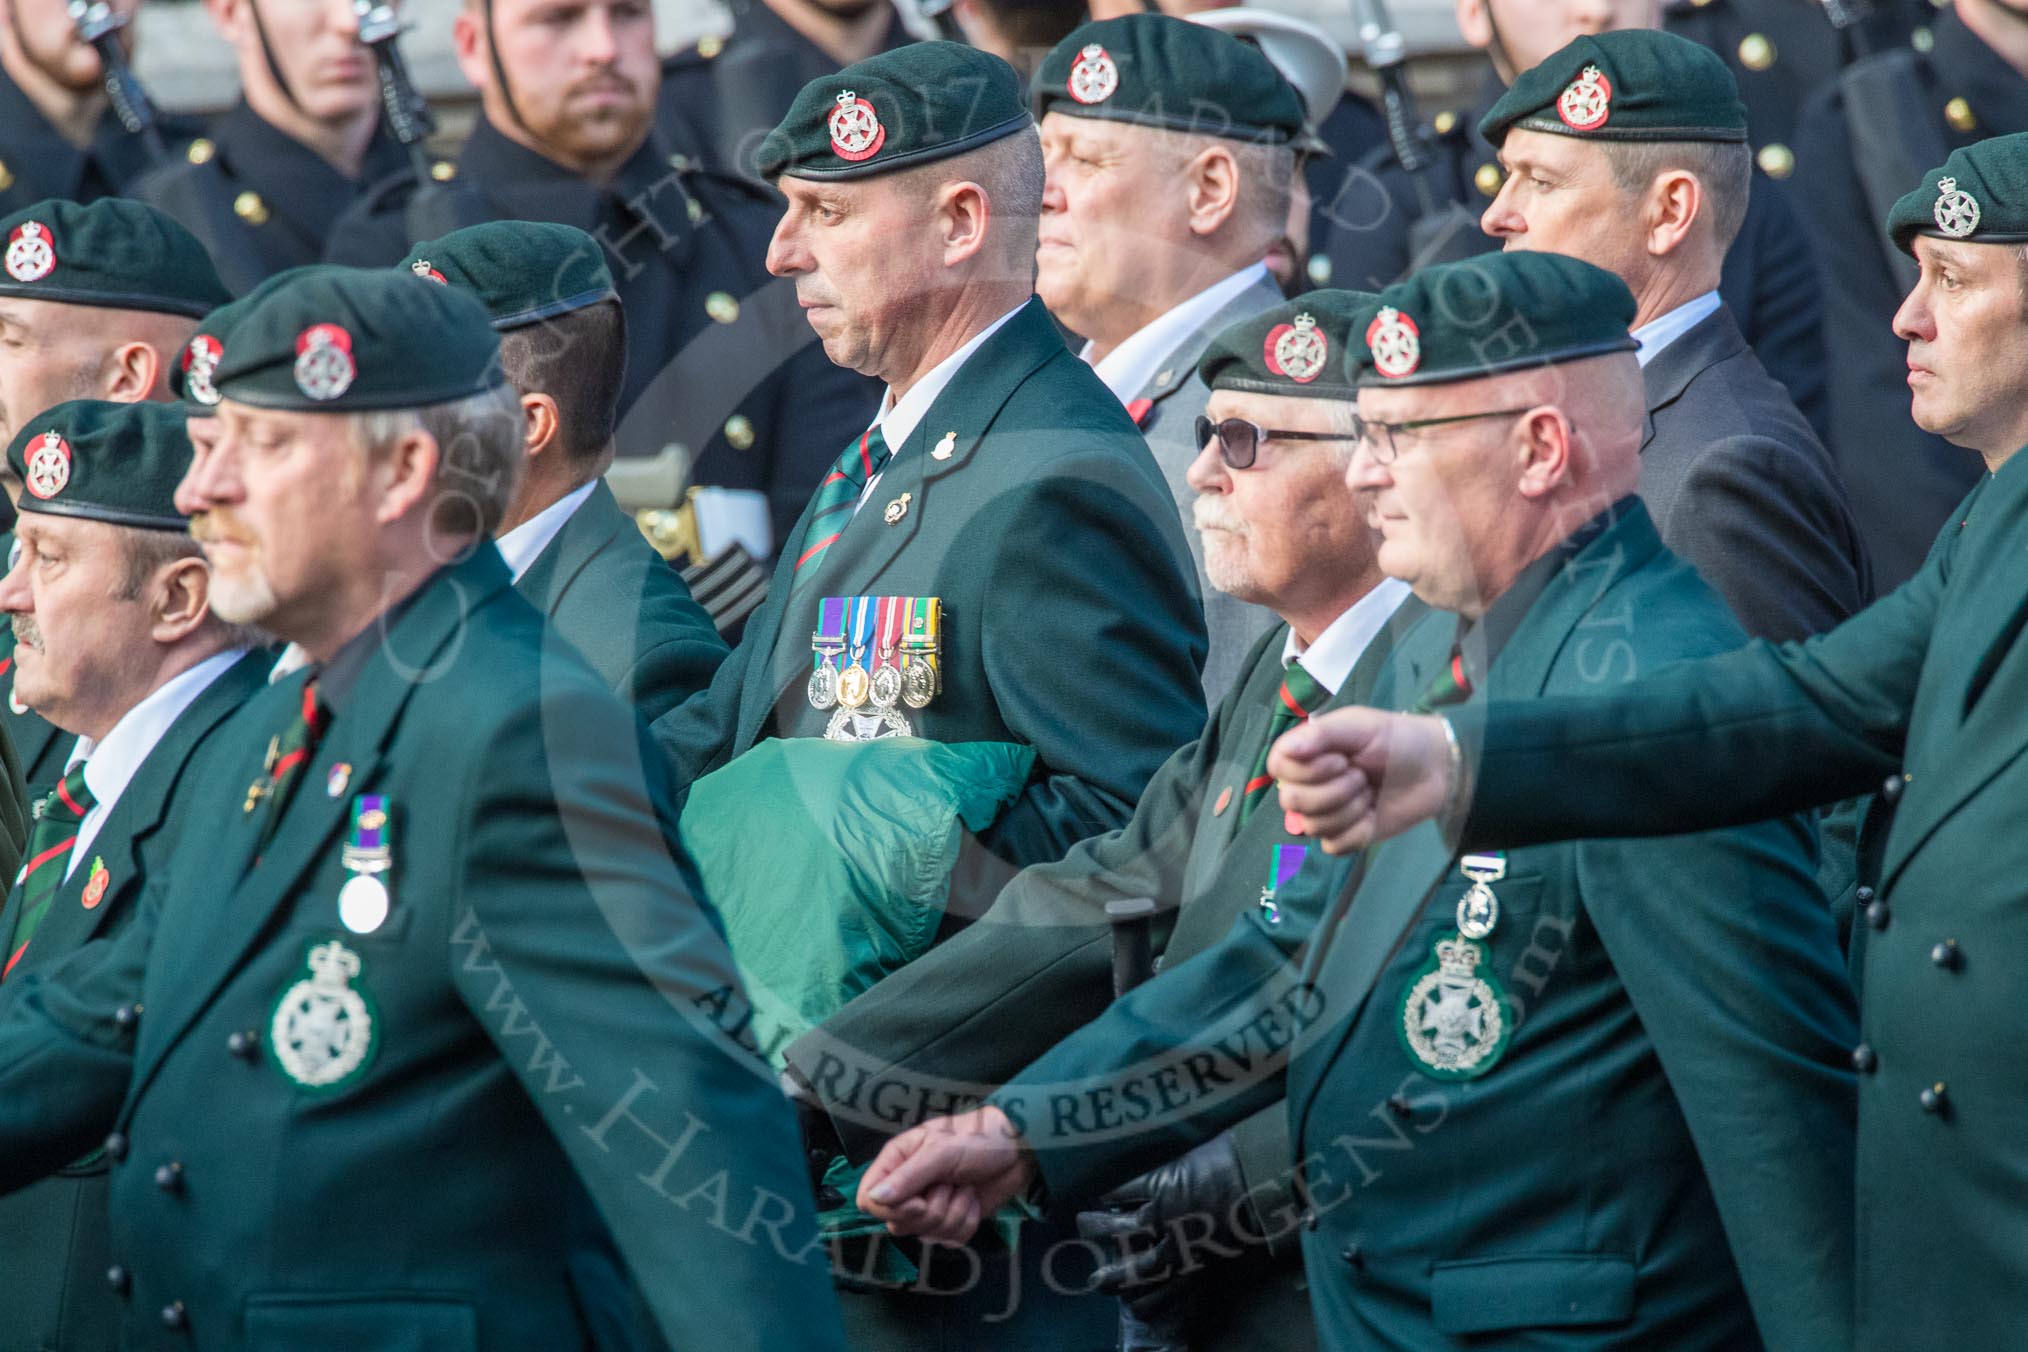 Royal Green Jackets (Group A2, 153 members)  during the Royal British Legion March Past on Remembrance Sunday at the Cenotaph, Whitehall, Westminster, London, 11 November 2018, 11:55.